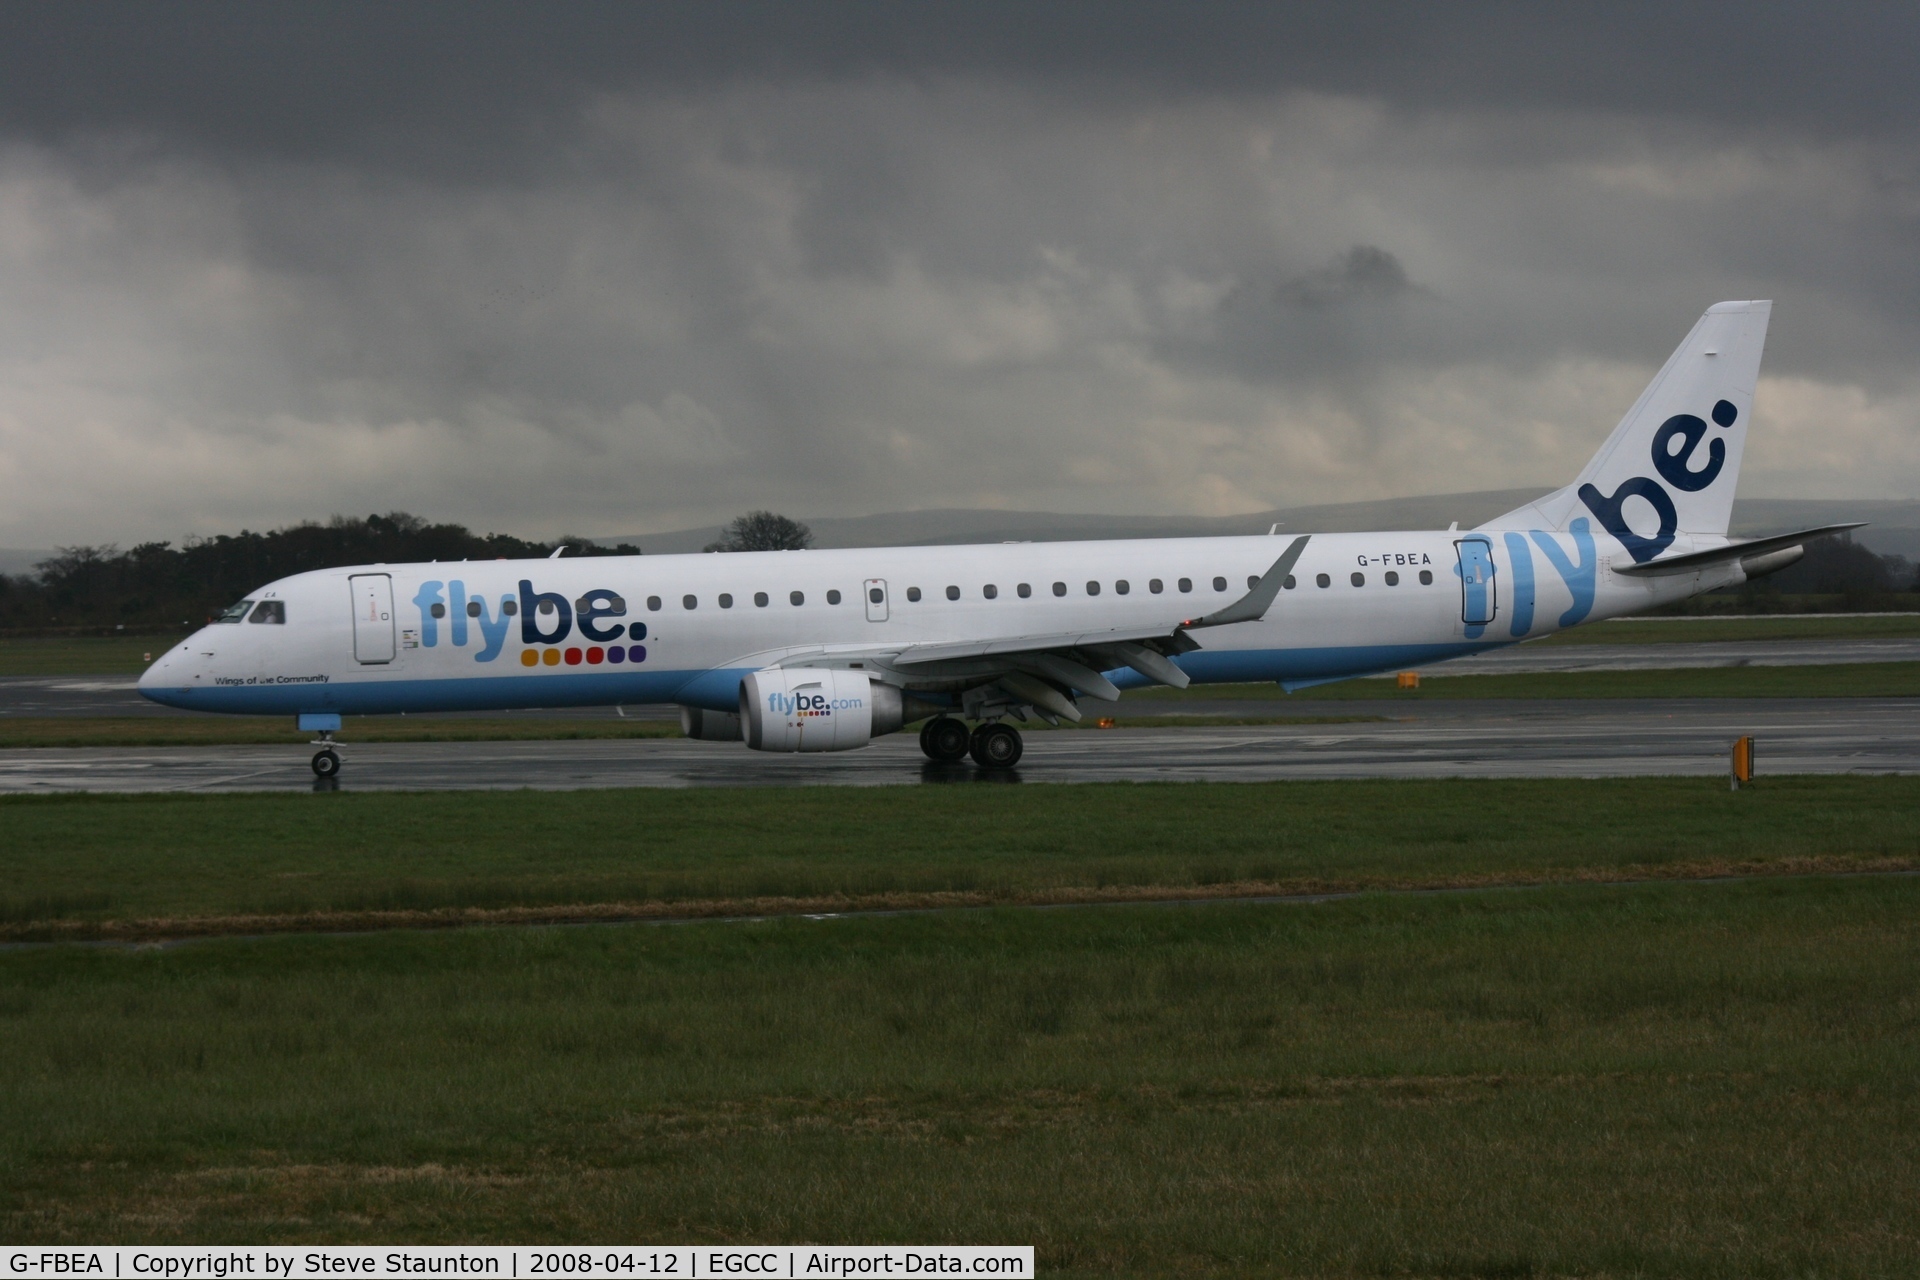 G-FBEA, 2006 Embraer 195LR (ERJ-190-200LR) C/N 19000029, Taken at Manchester Airport on a typical showery April day